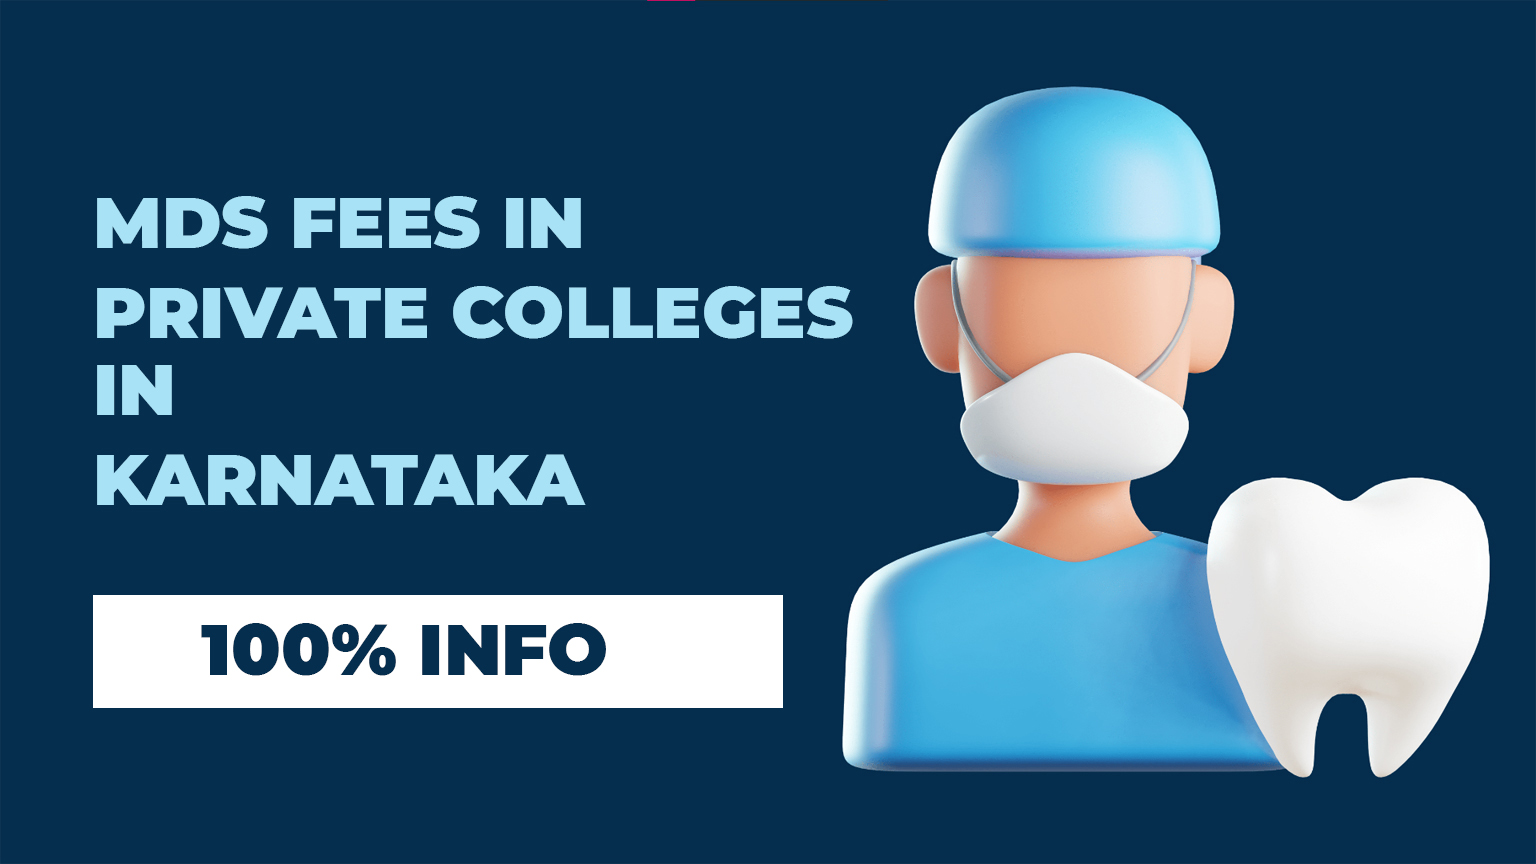 MDS Fees in Private Colleges in Karnataka